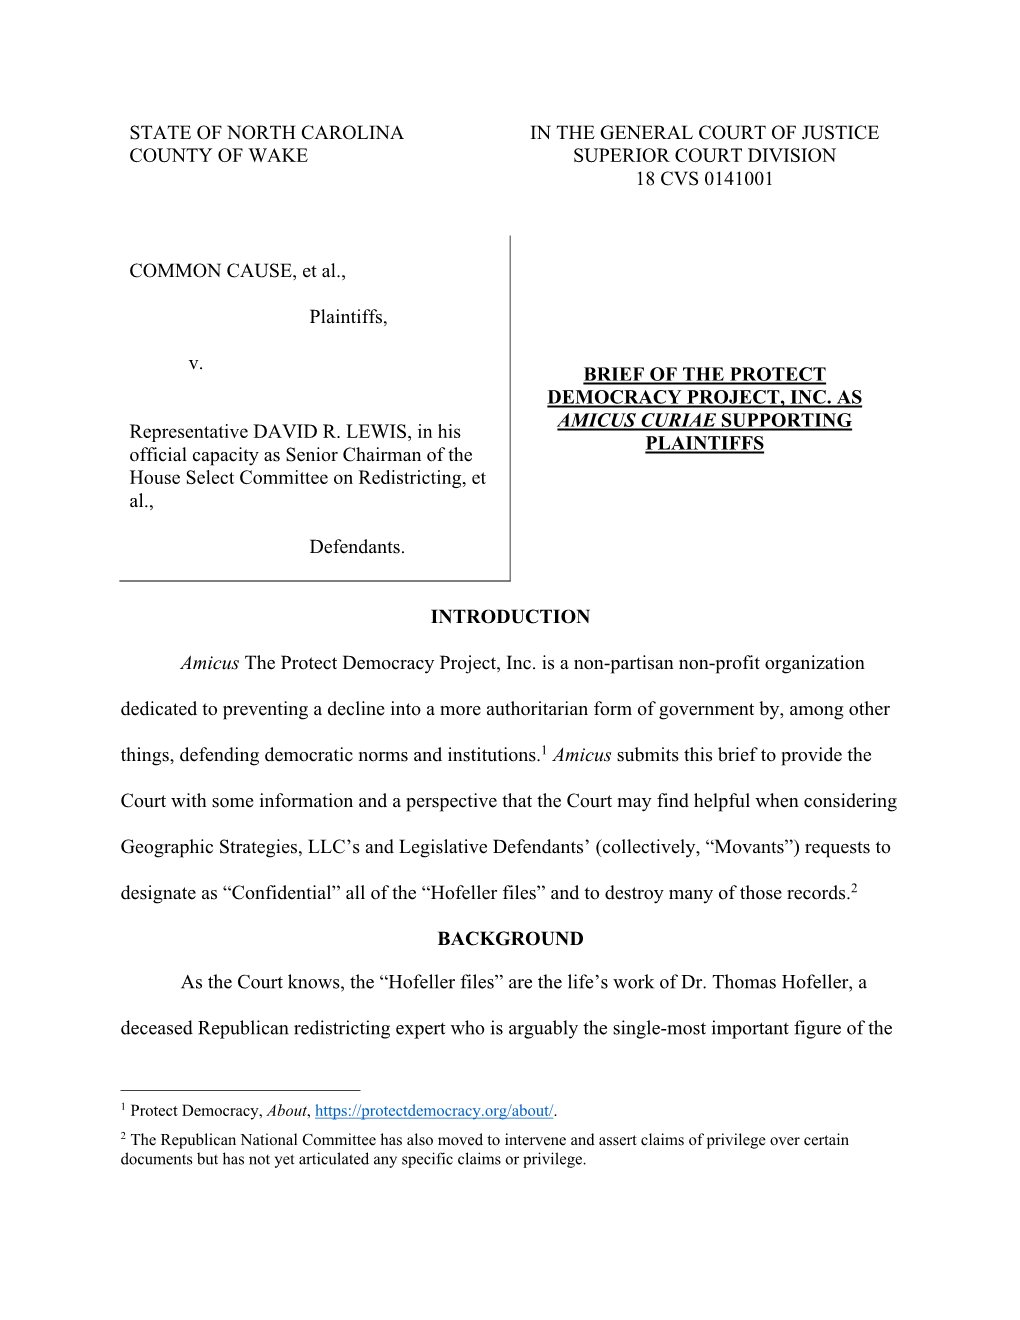 Amicus Brief of the Protect Democracy Project, Inc